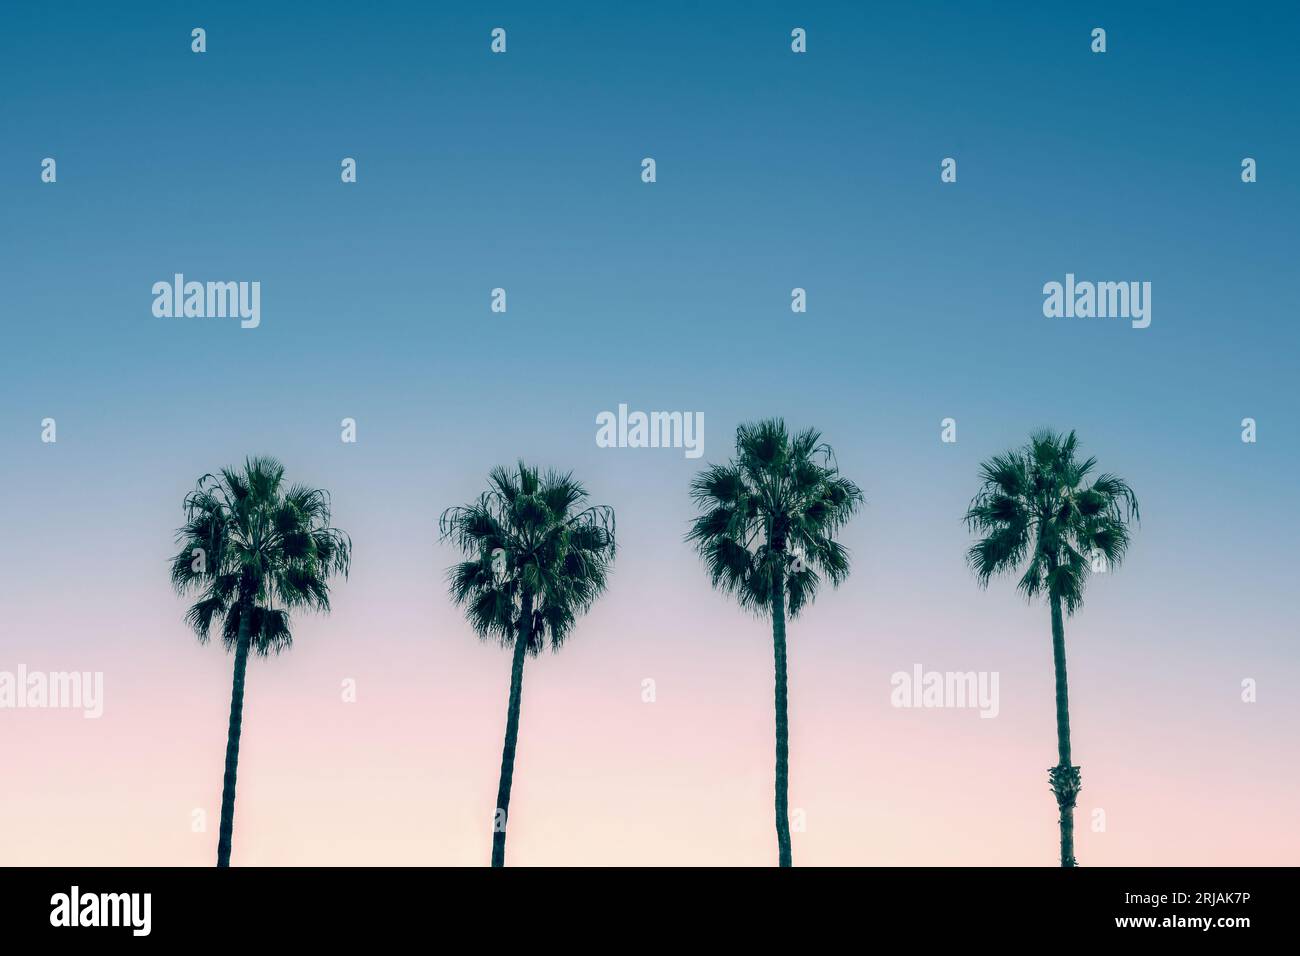 Palm trees and blue sky, vintage California summer vibes Stock Photo